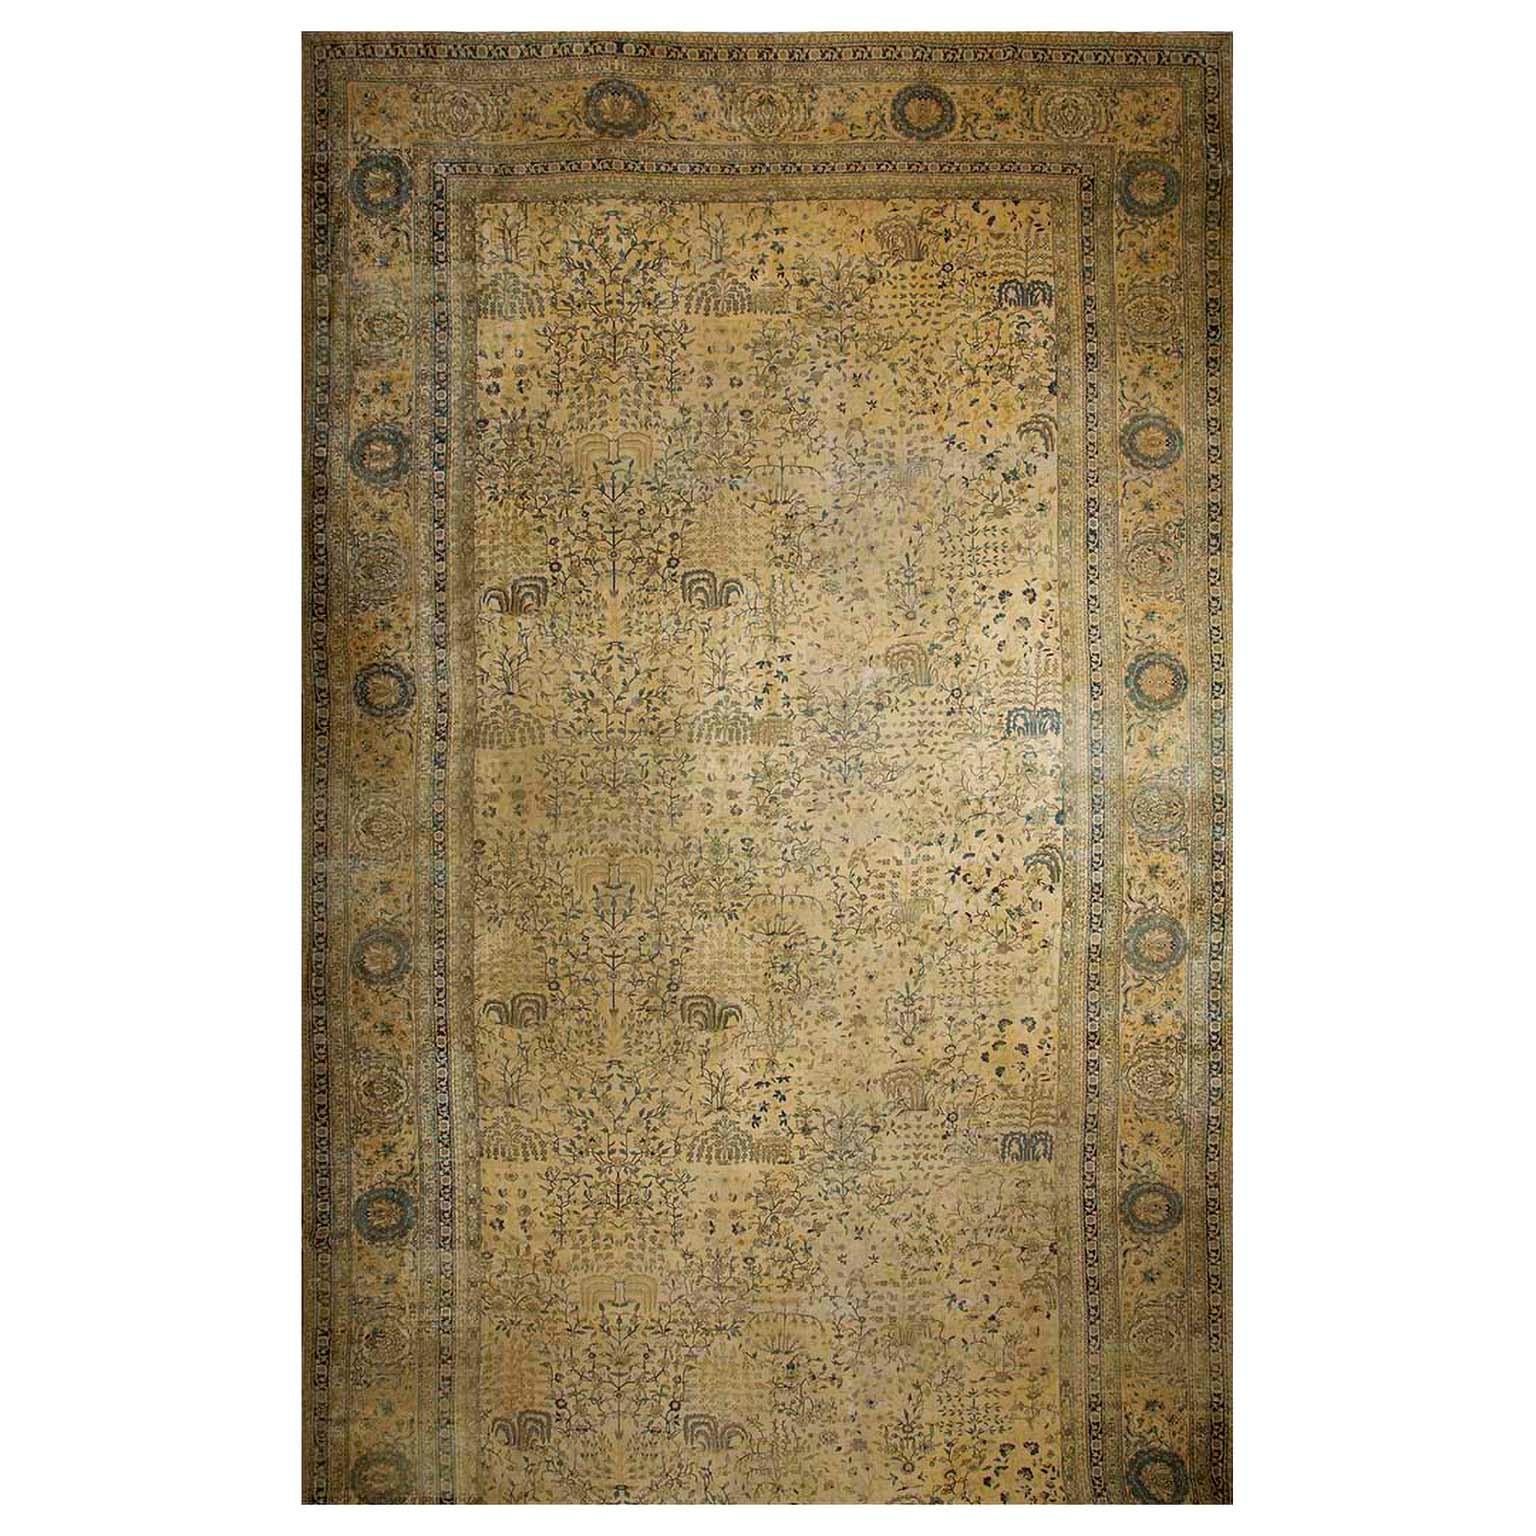 Early 20th Century Indian Lahore Carpet ( 12'6" x 24 - 381 x 732 ) For Sale